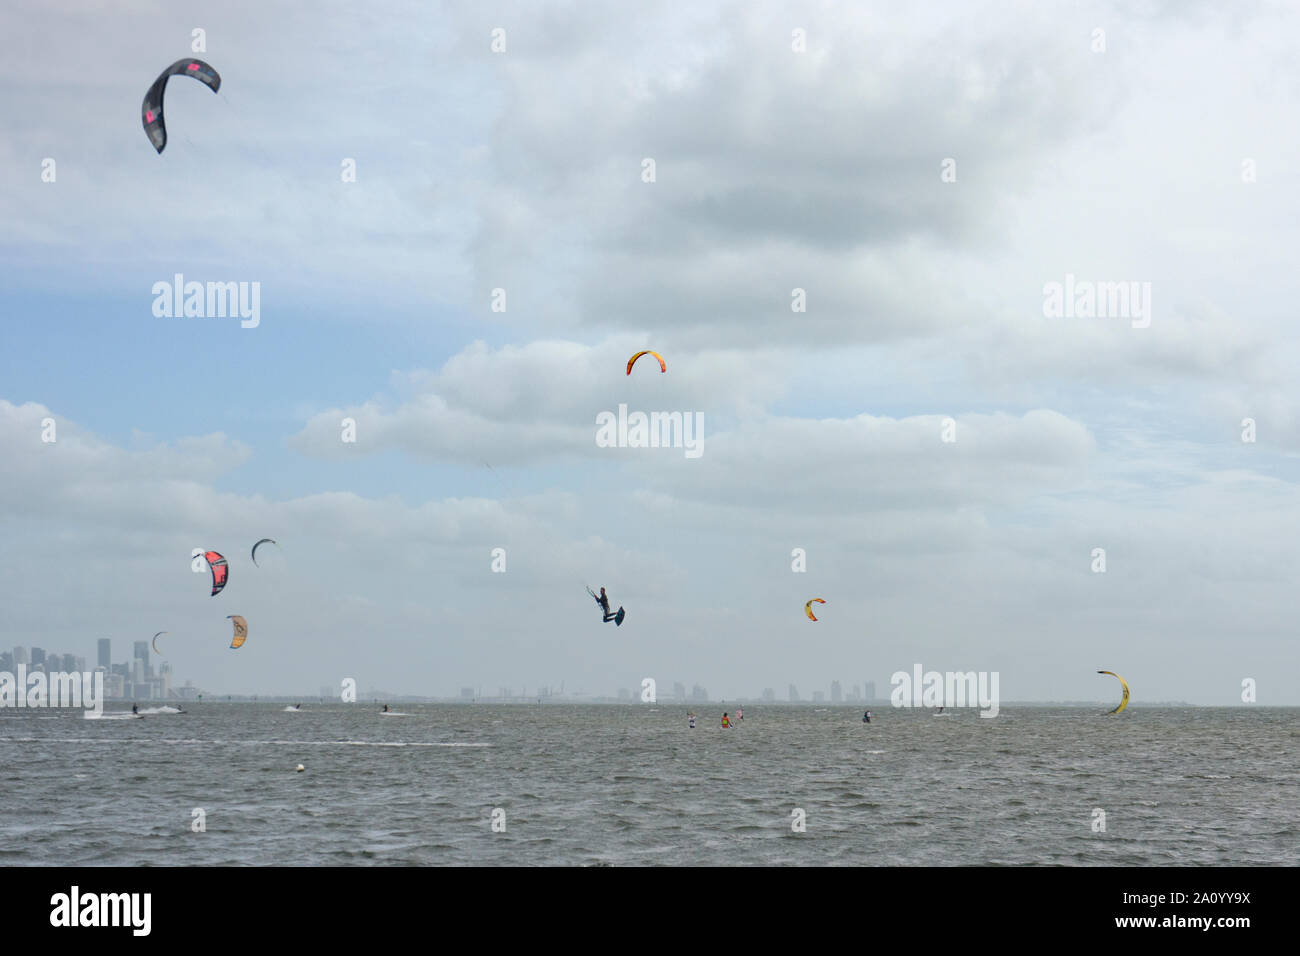 Biscayne Bay on a windy Sunday morning  with many kiteboarders enjoying the weather as seen from Matheson Hammock Park Stock Photo